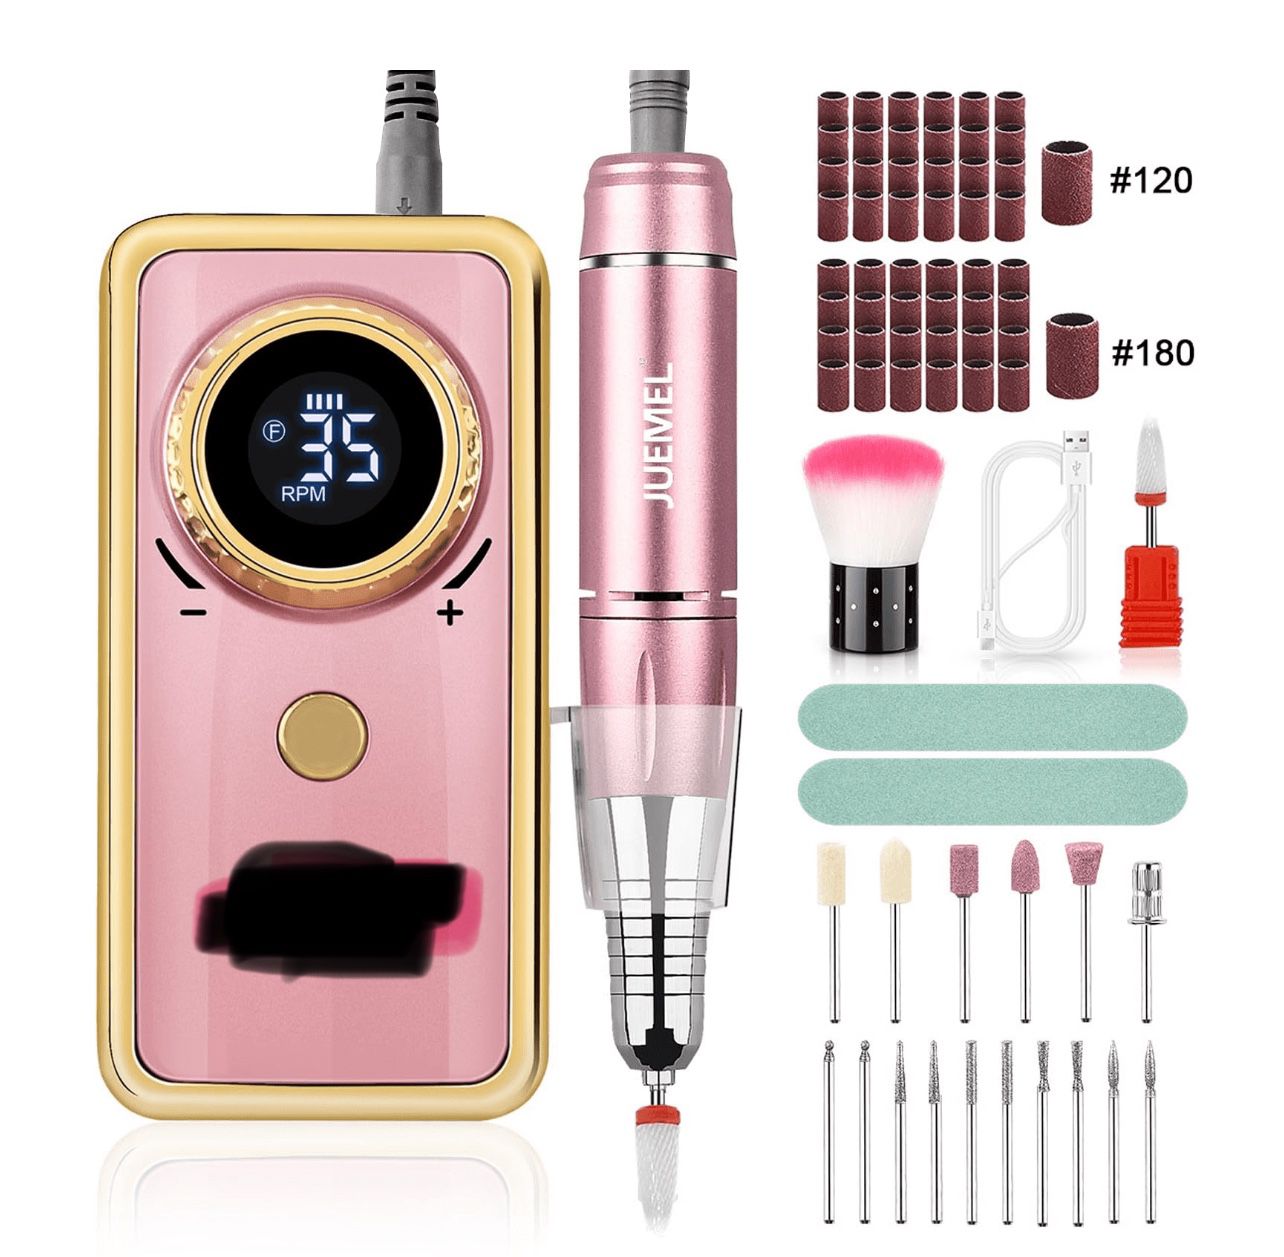 Portable Electric Nail Drill 35000 RPM,  Electric Nail File 2600mAh,Forward/Reverse Rotation 36W Nail Drill Machine for Gel Nails,Acrylic,Manicure,Ped